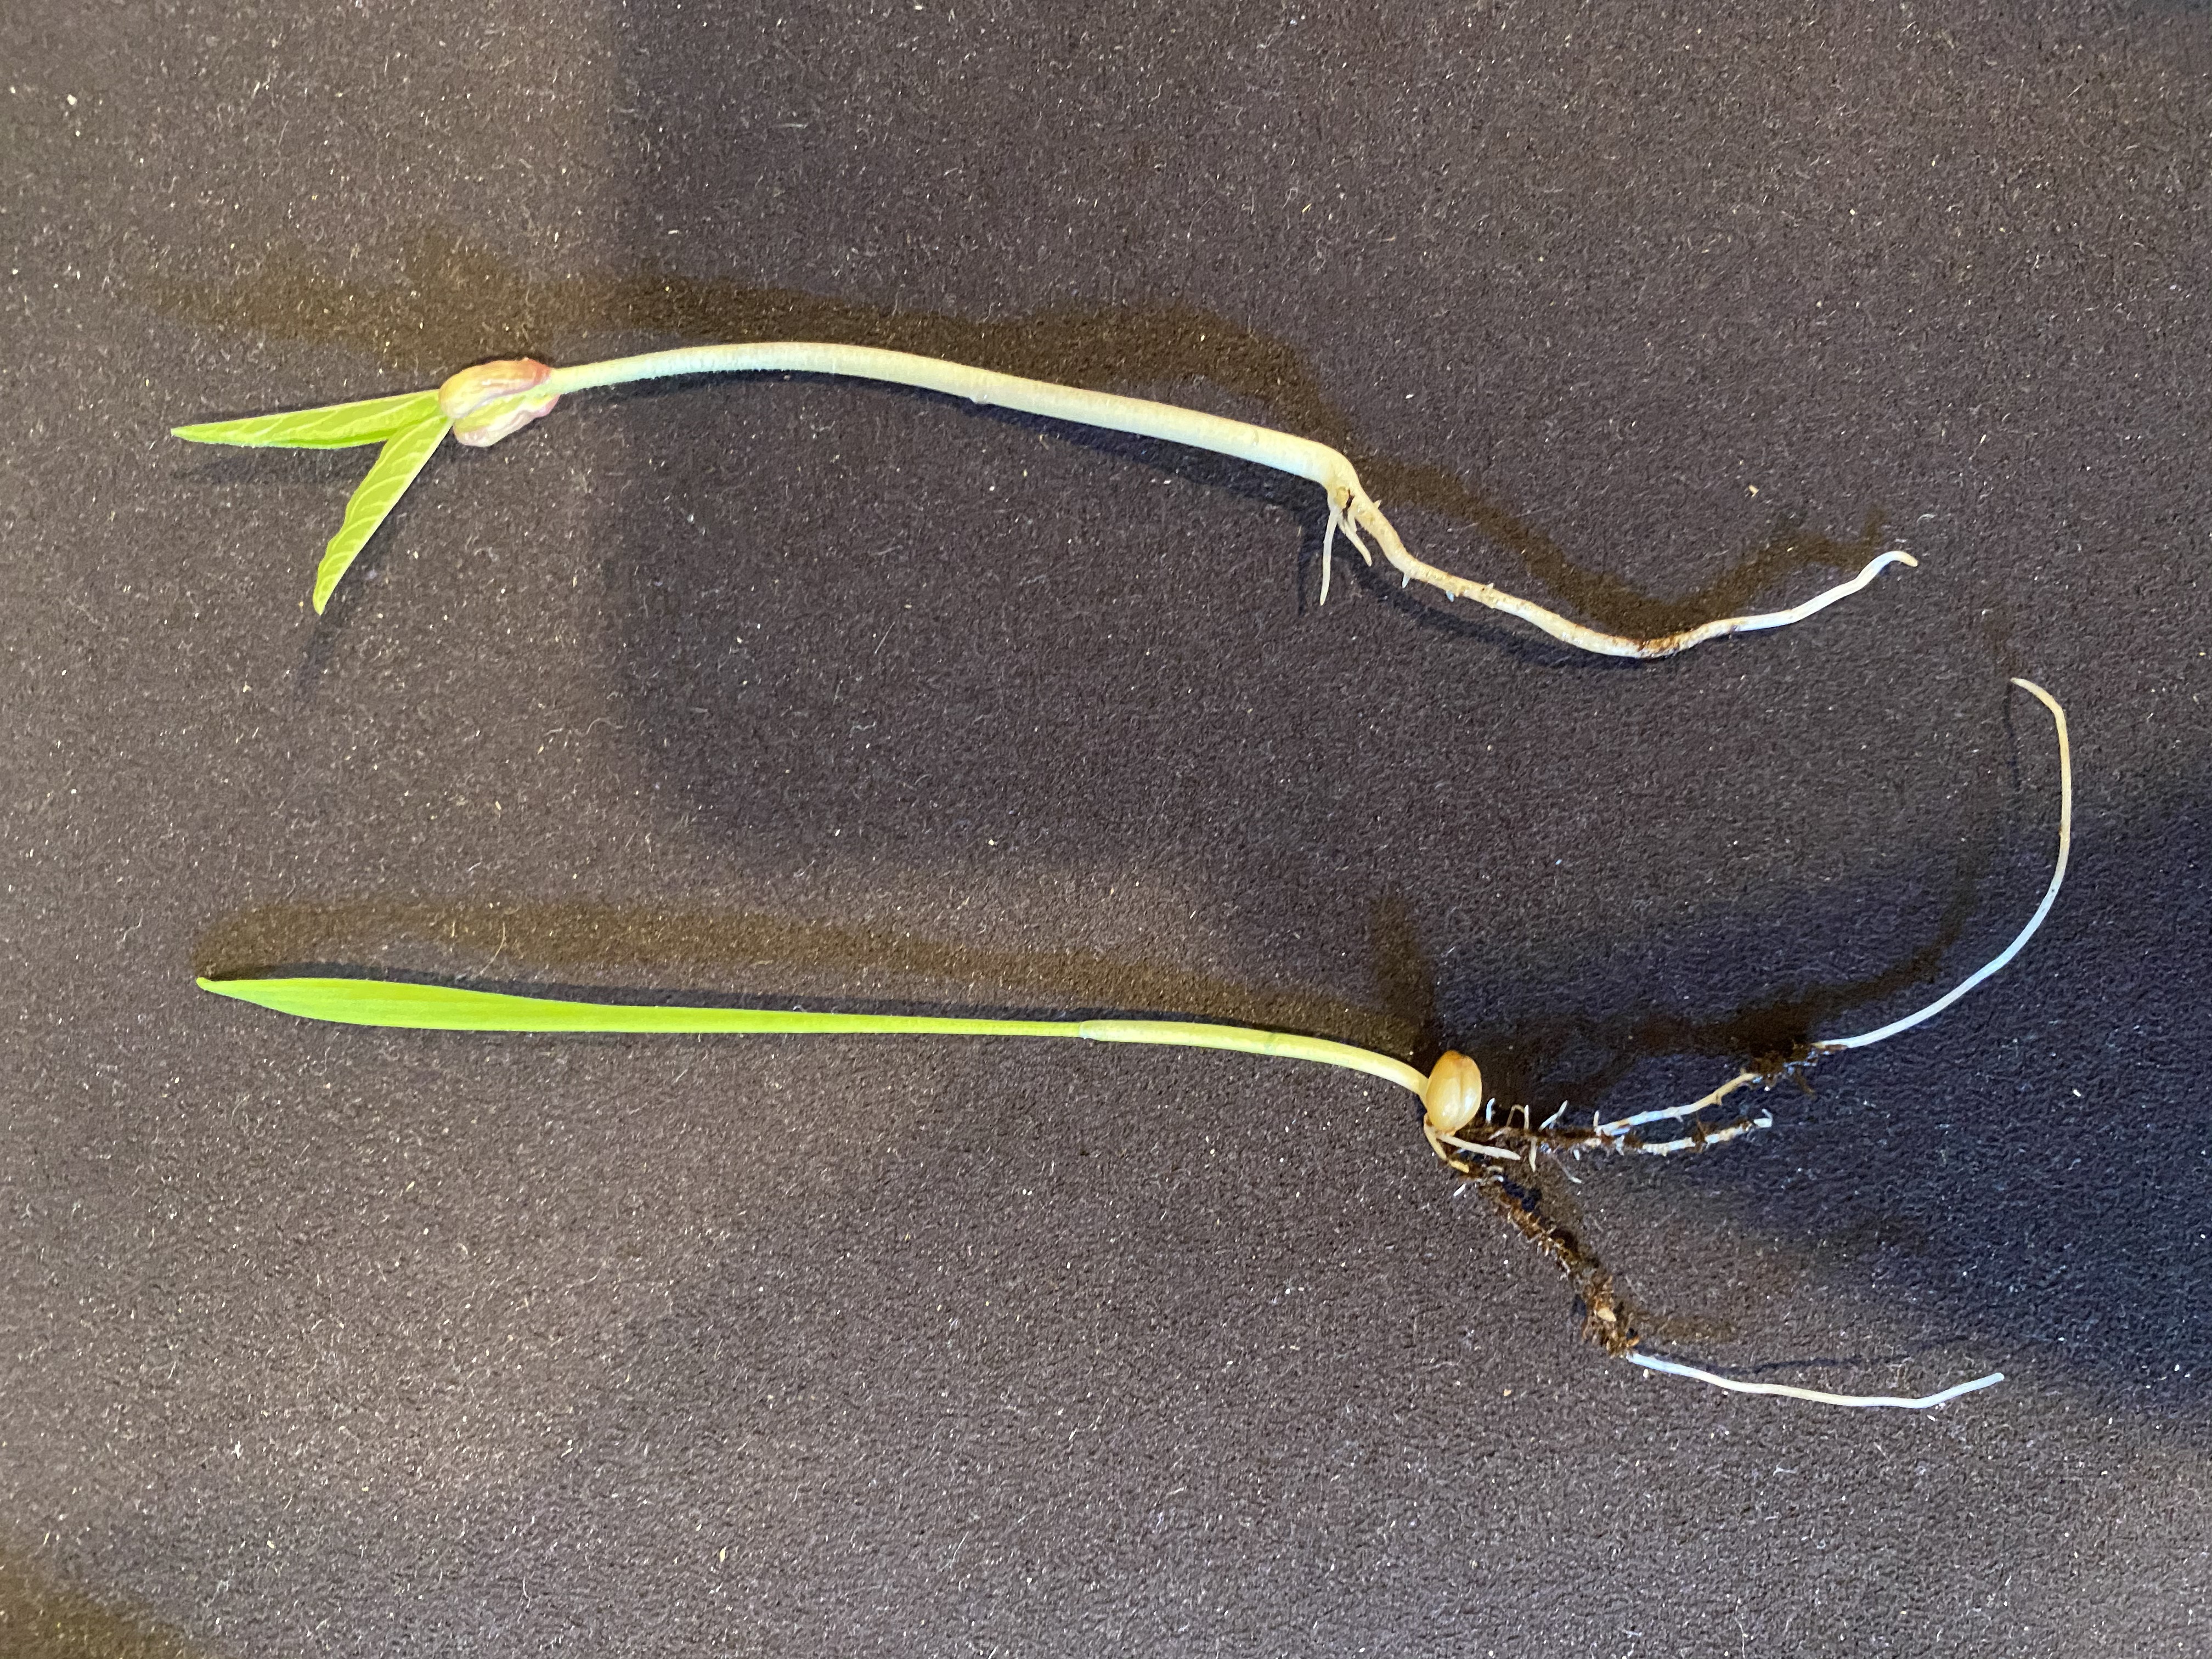 Wheat and Mung Bean seedlings, showing roots, stem, and cotyledons